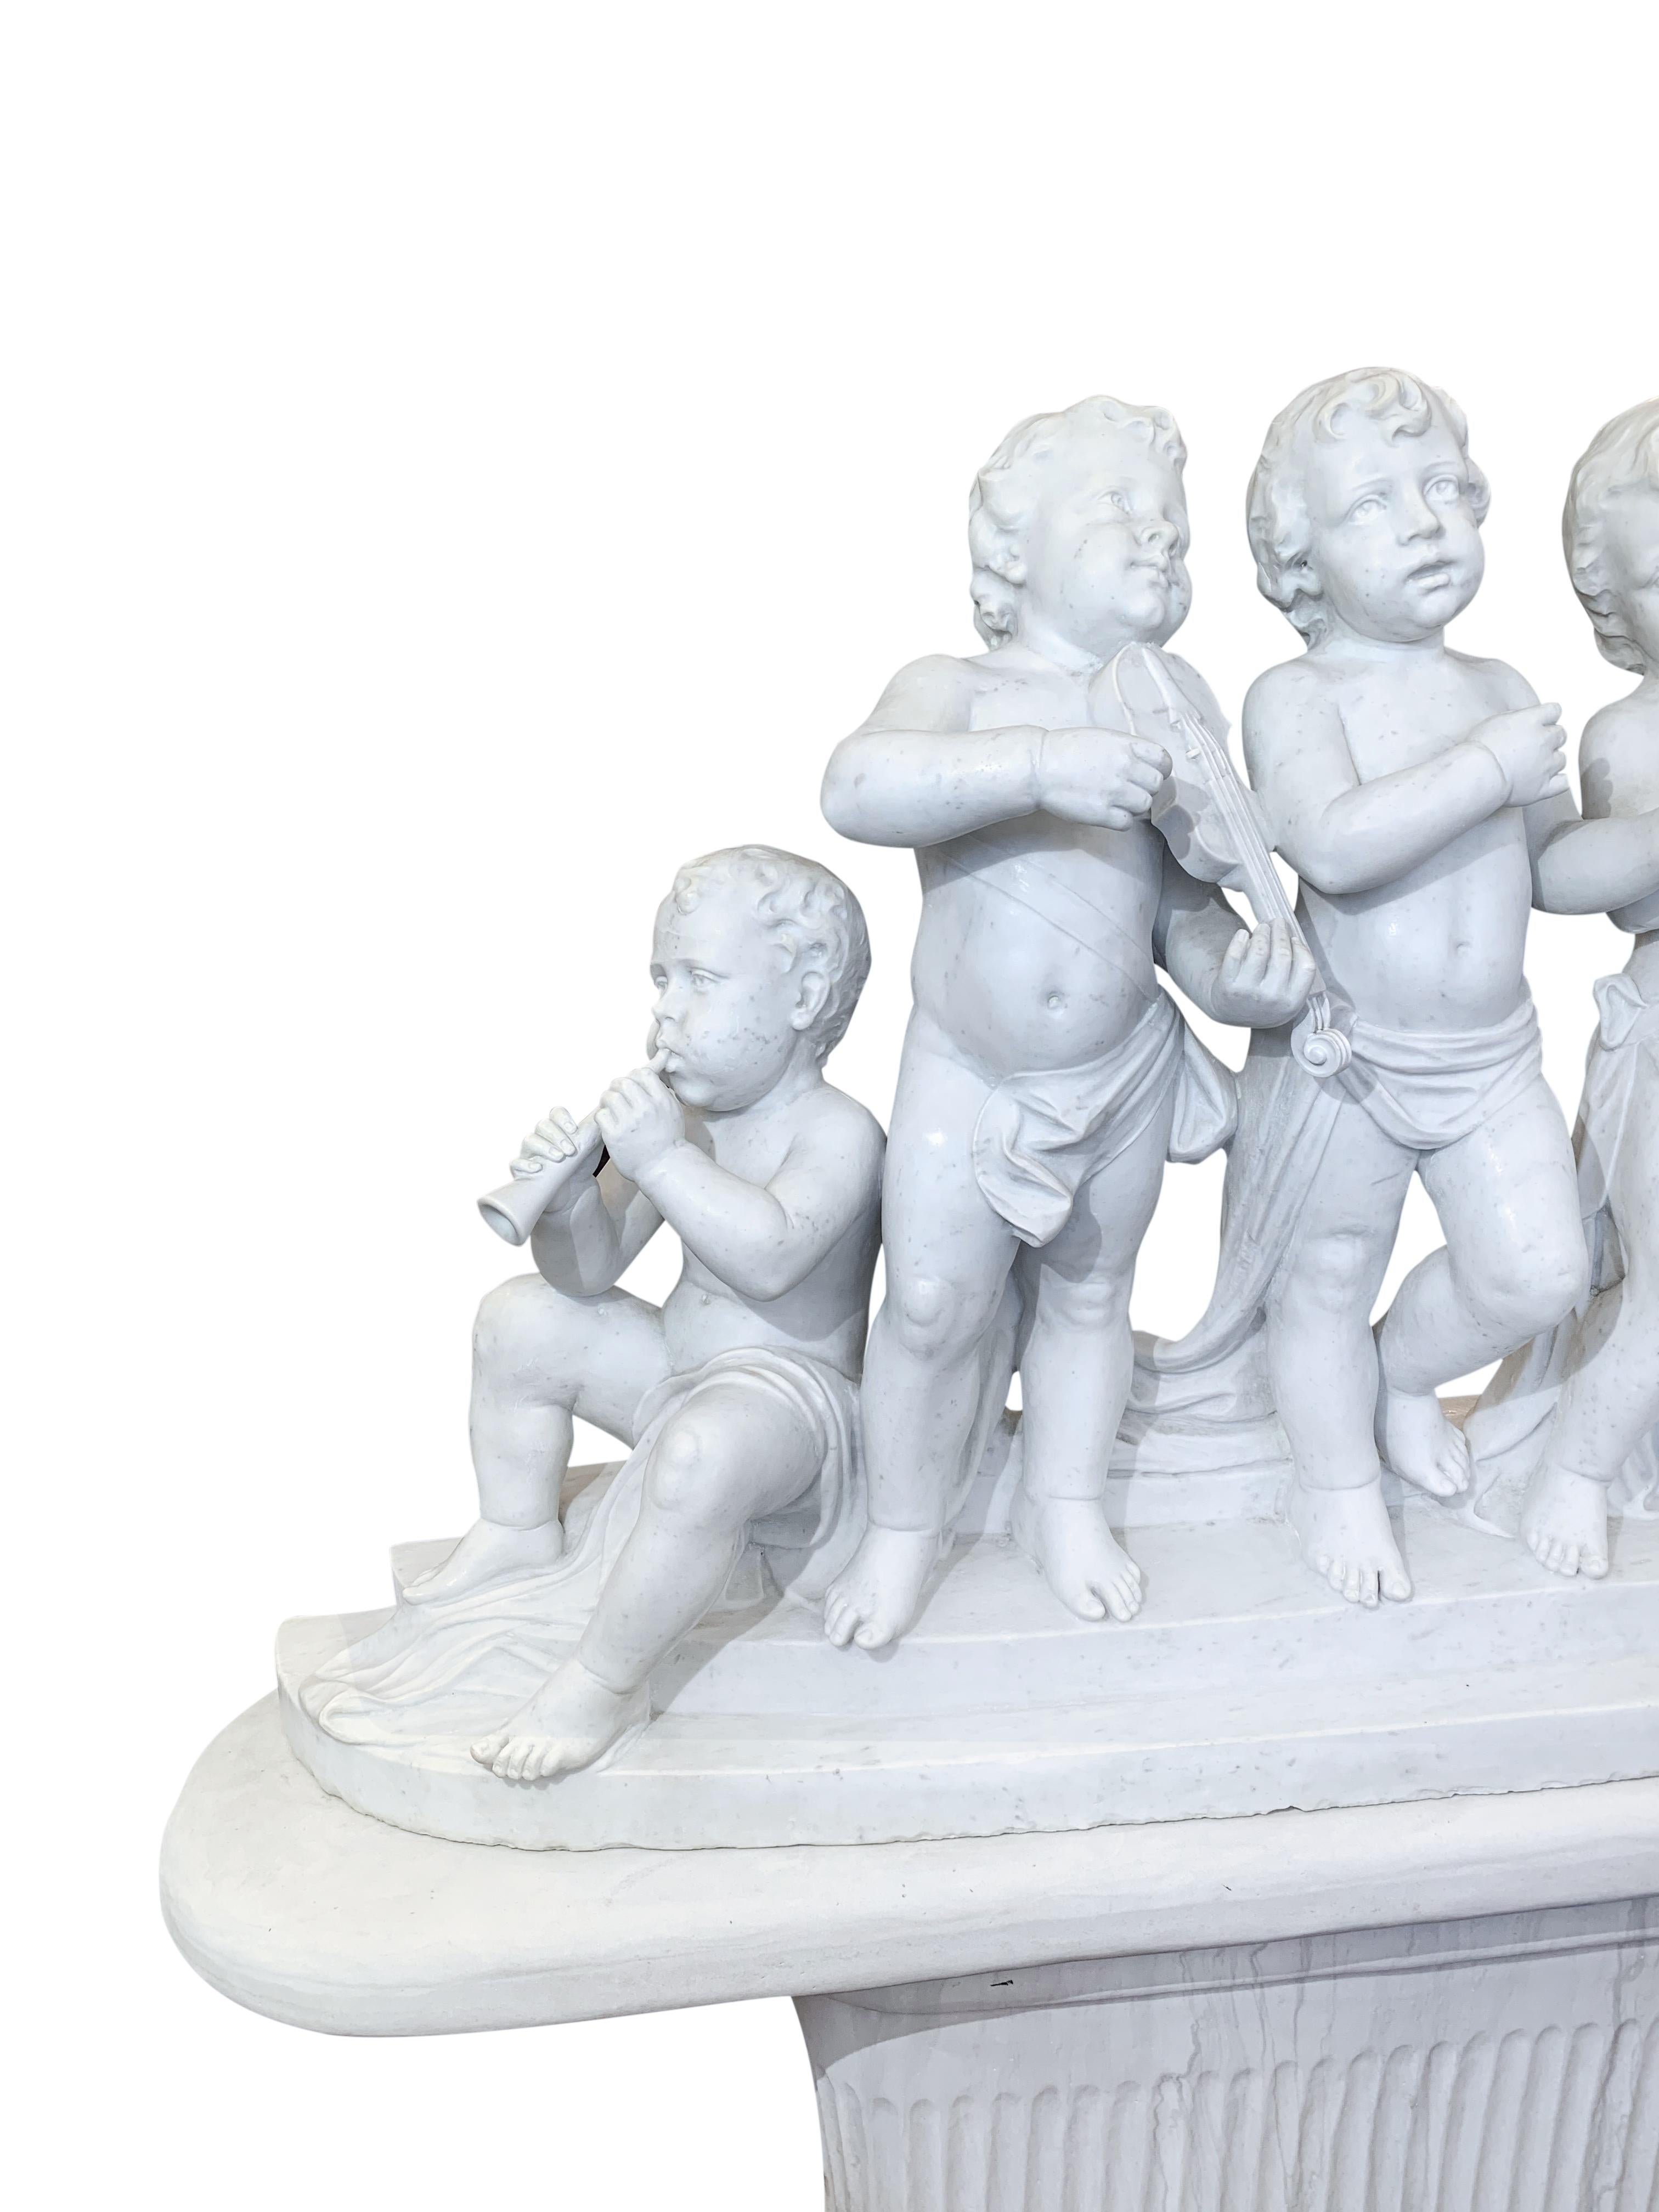 Carrara Marble Large 19th Century Italian Carved Marble Group Depicting Musicians  on stand